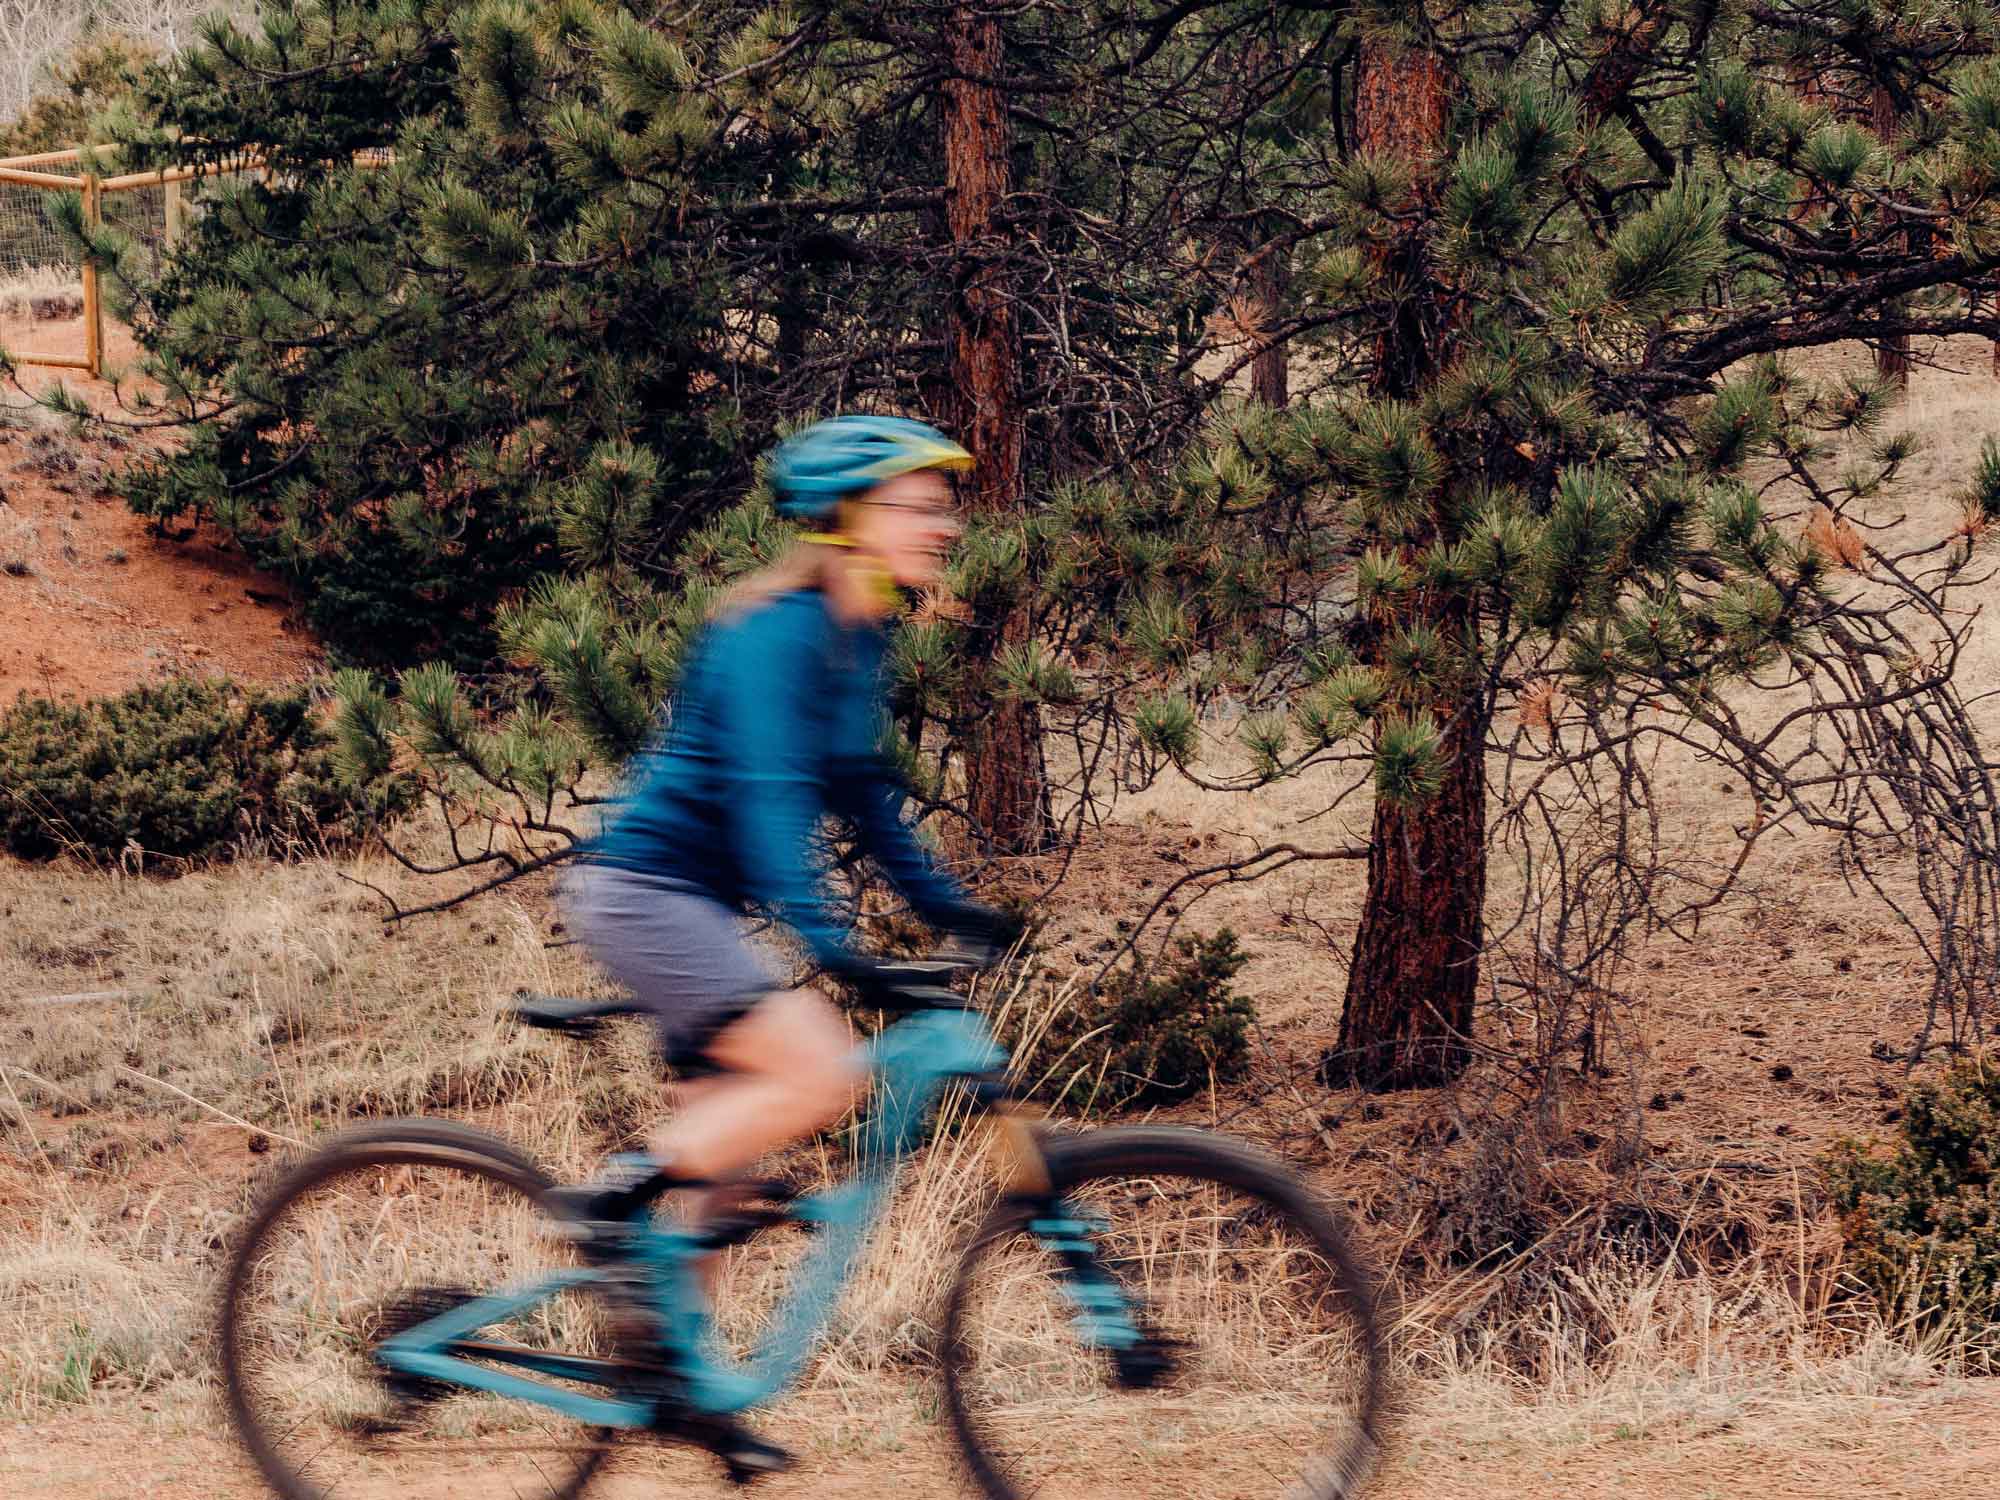 Me, Jacquelyn, riding my blue Ibis Ripmo on a dirt road with pine trees in the background